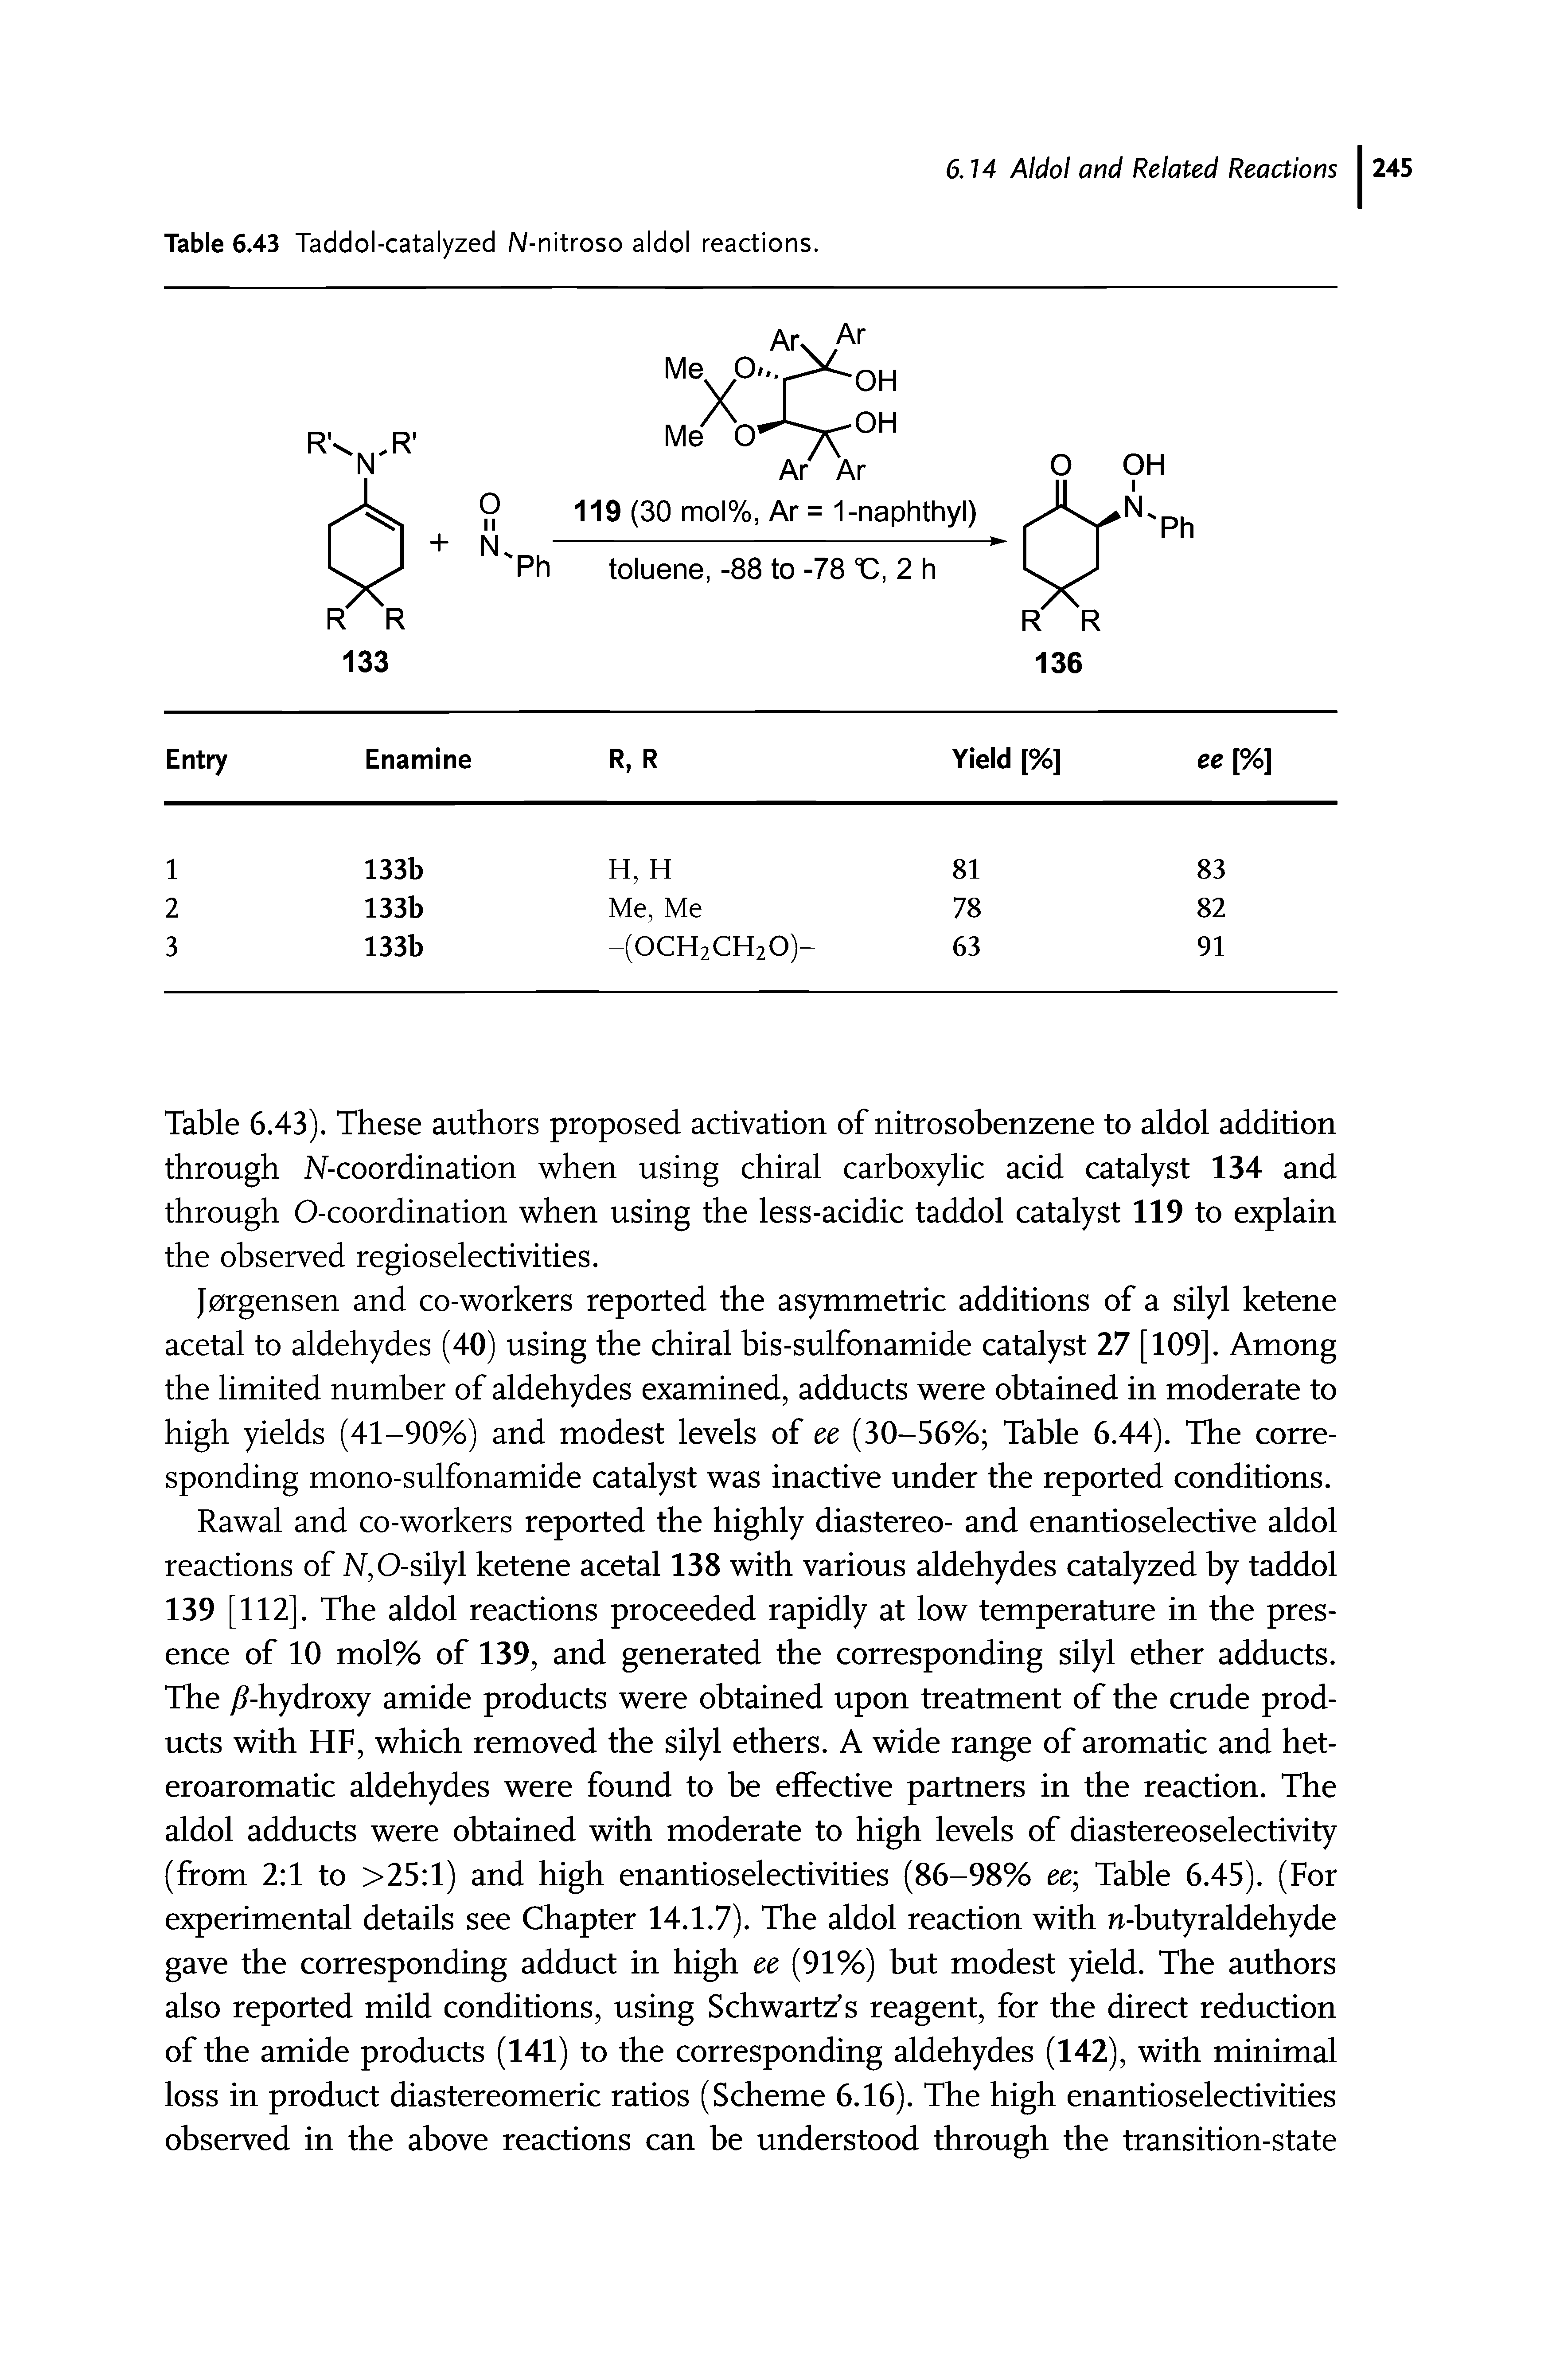 Table 6.43). These authors proposed activation of nitrosobenzene to aldol addition through N-coordination when using chiral carboxylic acid catalyst 134 and through O-coordination when using the less-acidic taddol catalyst 119 to explain the observed regioselectivities.